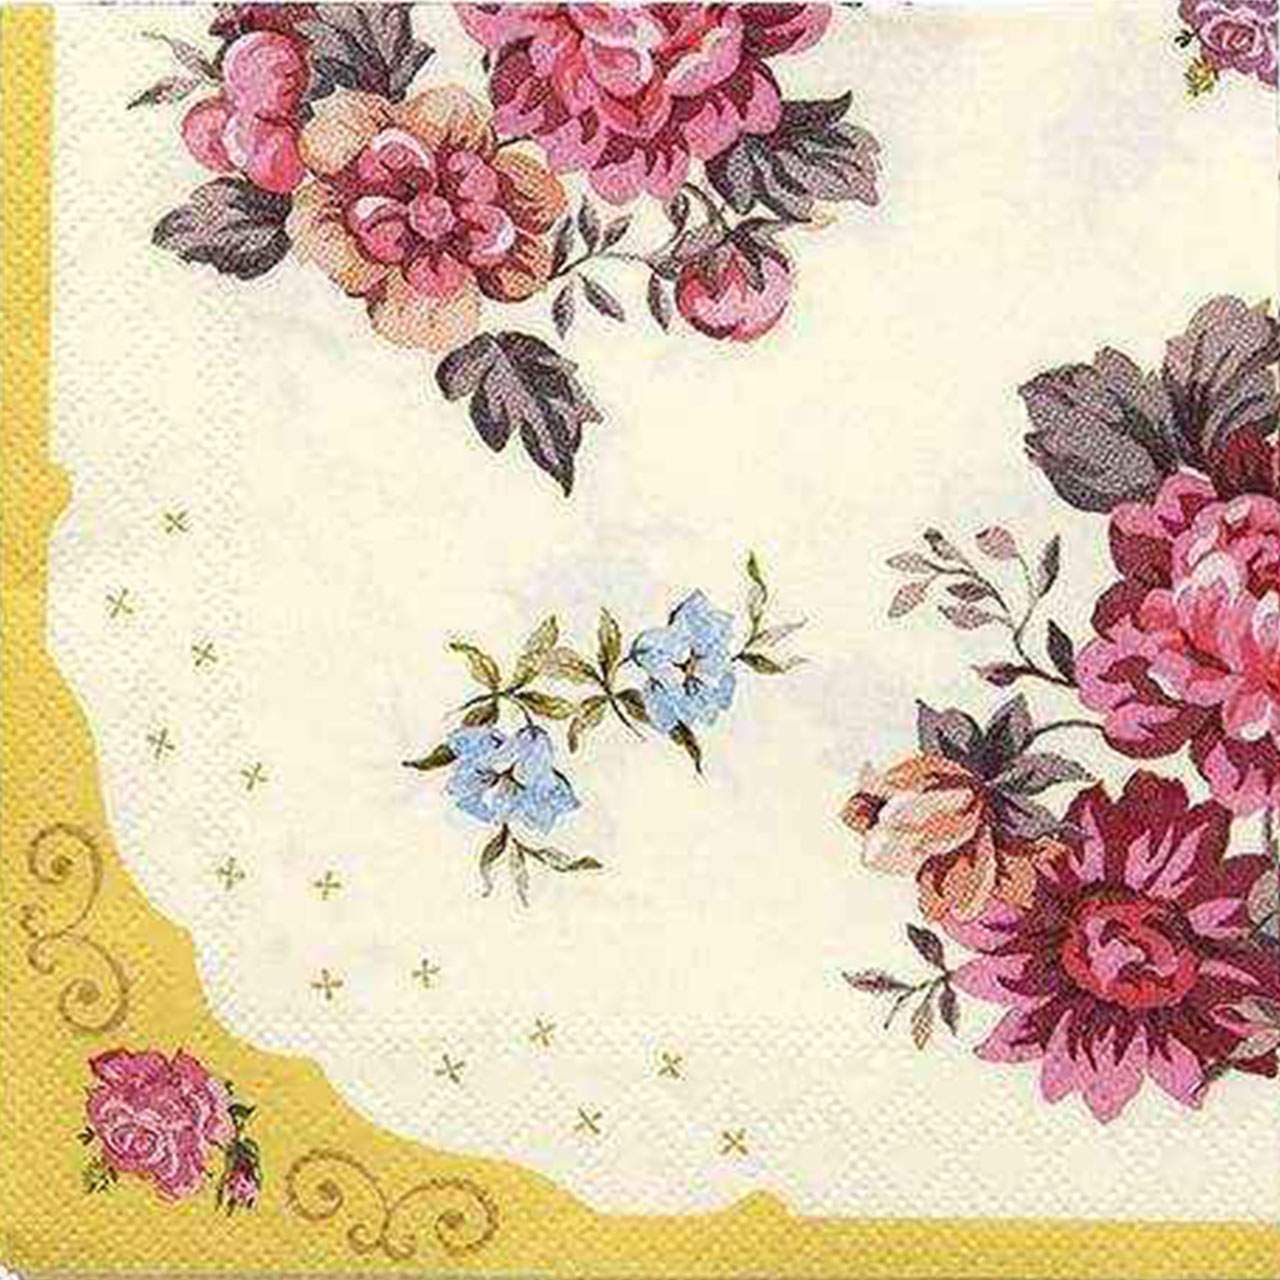 30 Yellow & Pink Floral Cocktail Napkins